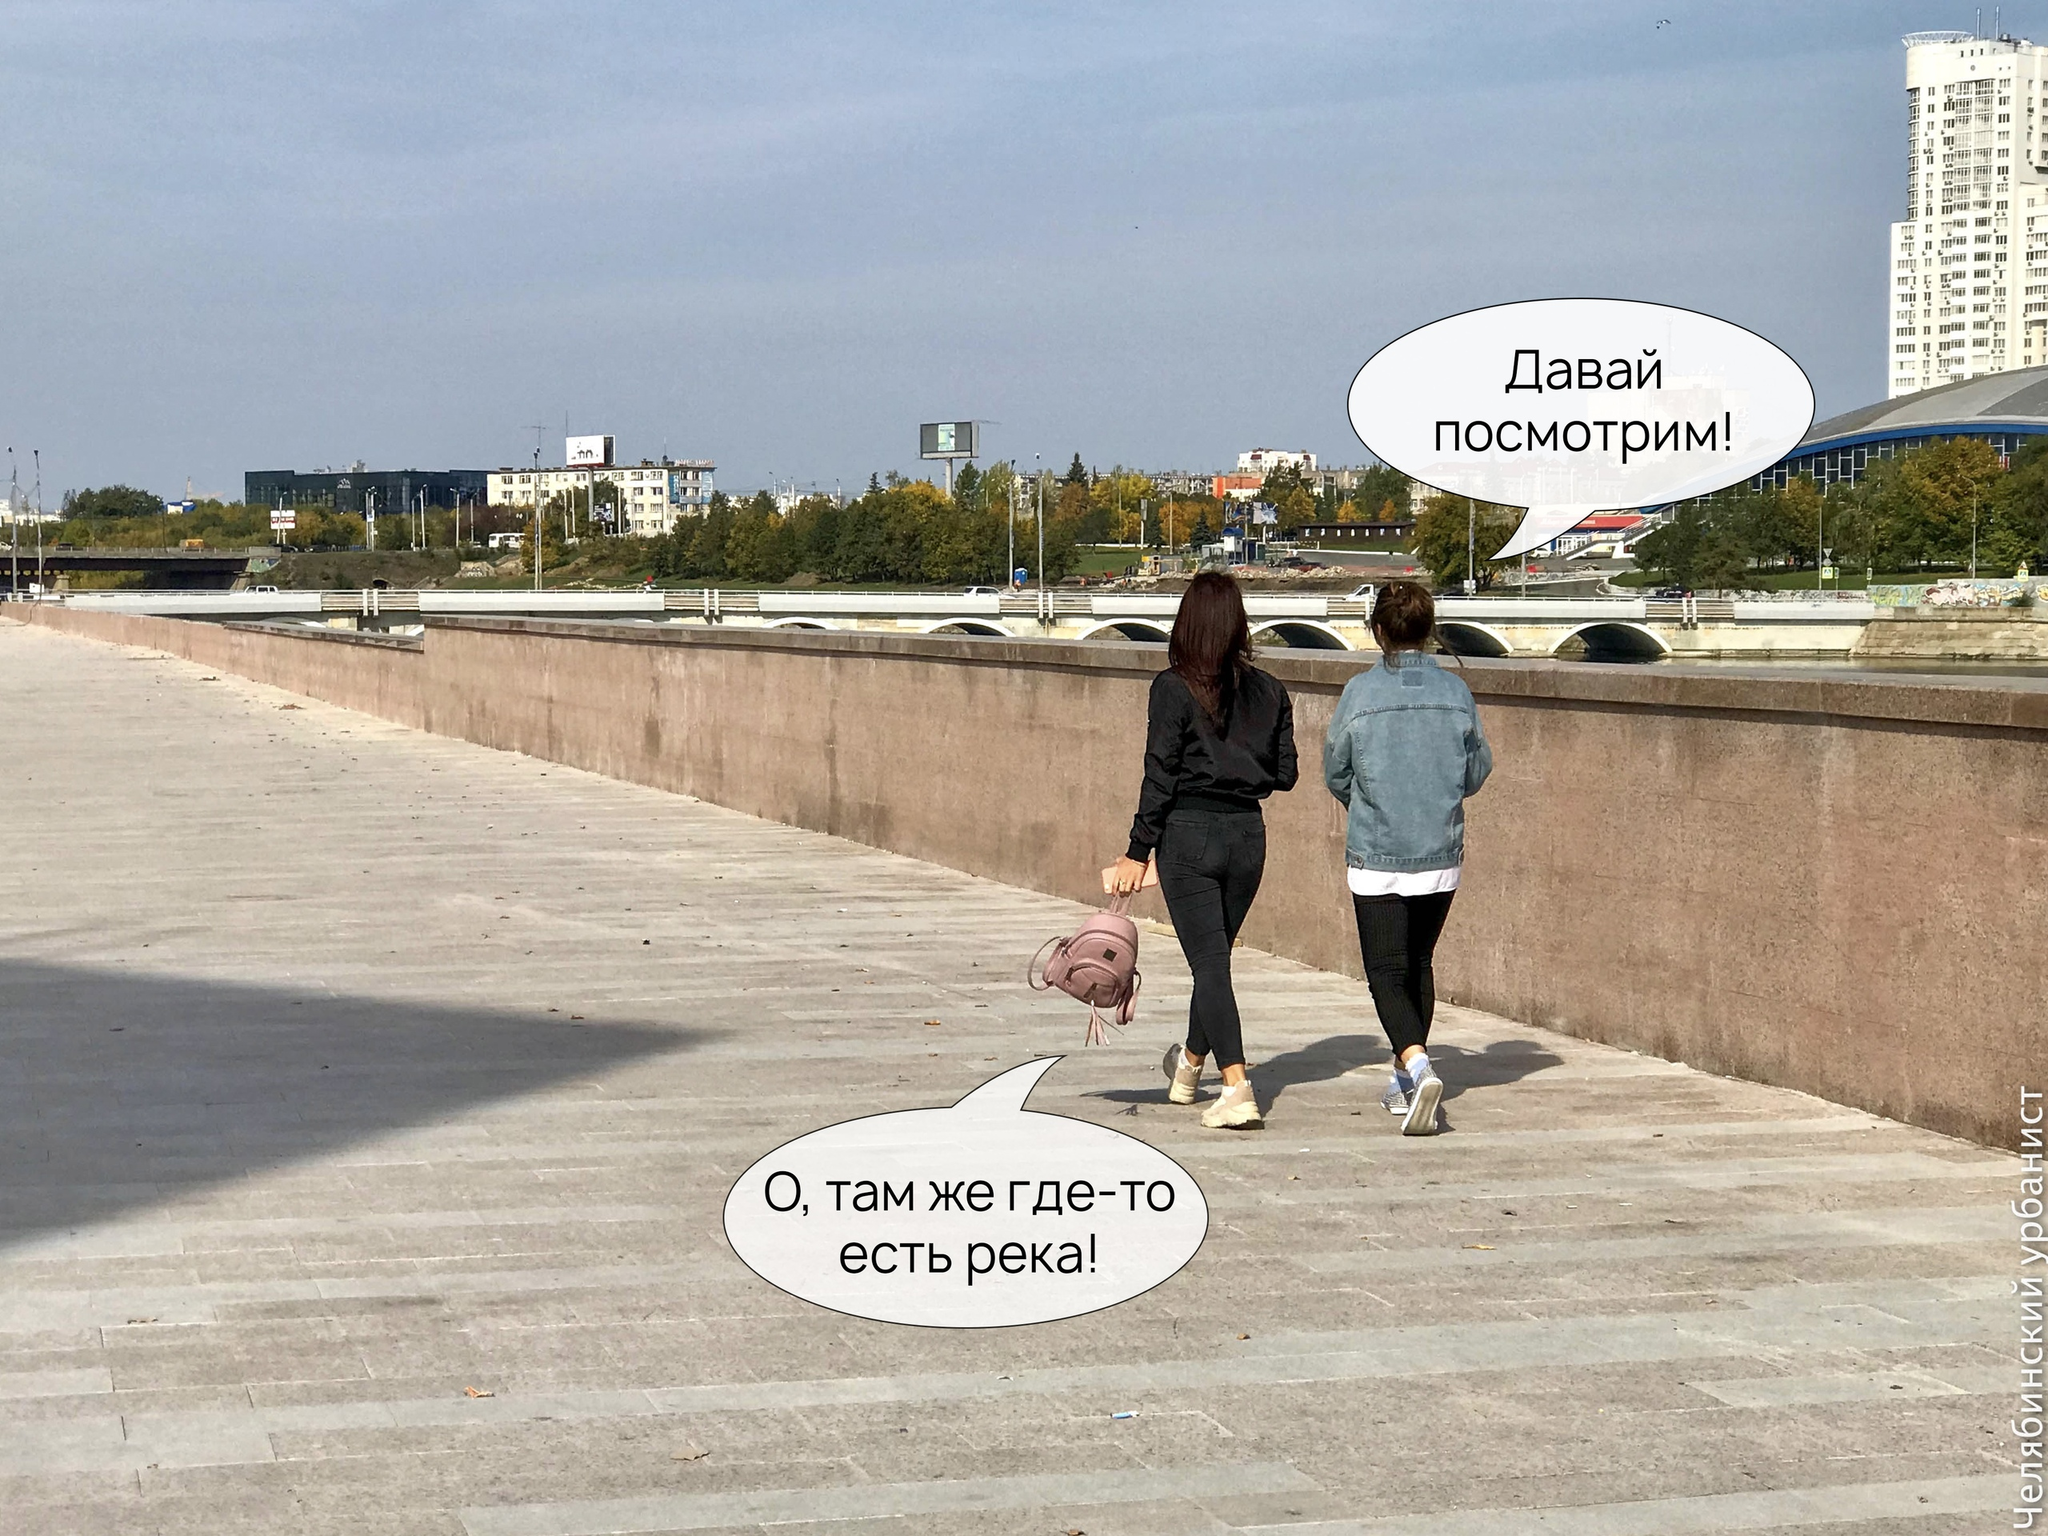 Chelyabinsk residents welcome the new embankment! - My, Chelyabinsk, Chelyabinsk urbanist, Embankment, Fencing, Beautification, Officials, Miass River, Longpost